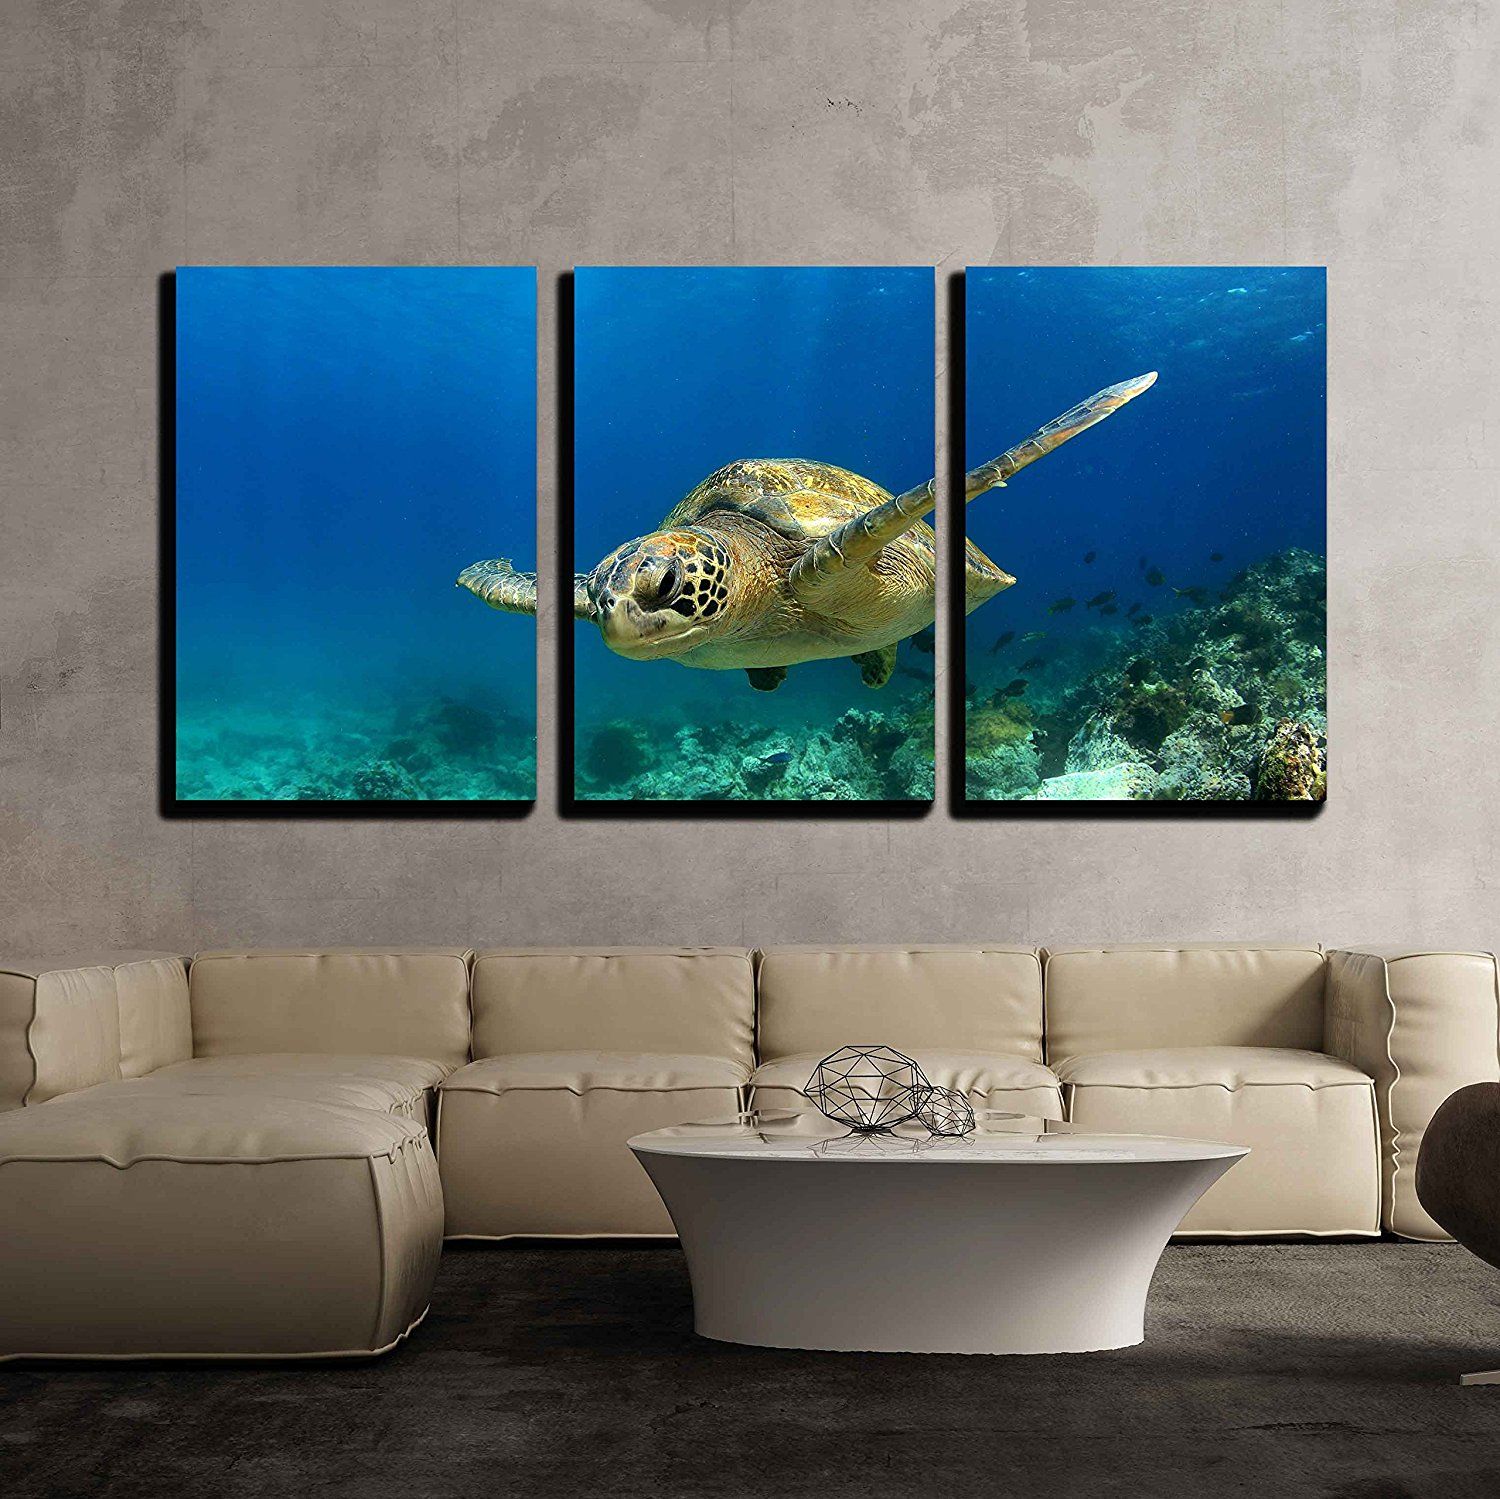 Wall26 3 Piece Canvas Wall Art – Green Sea Turtle Swimming Underwater With Best And Newest Swimming Wall Art (View 1 of 20)